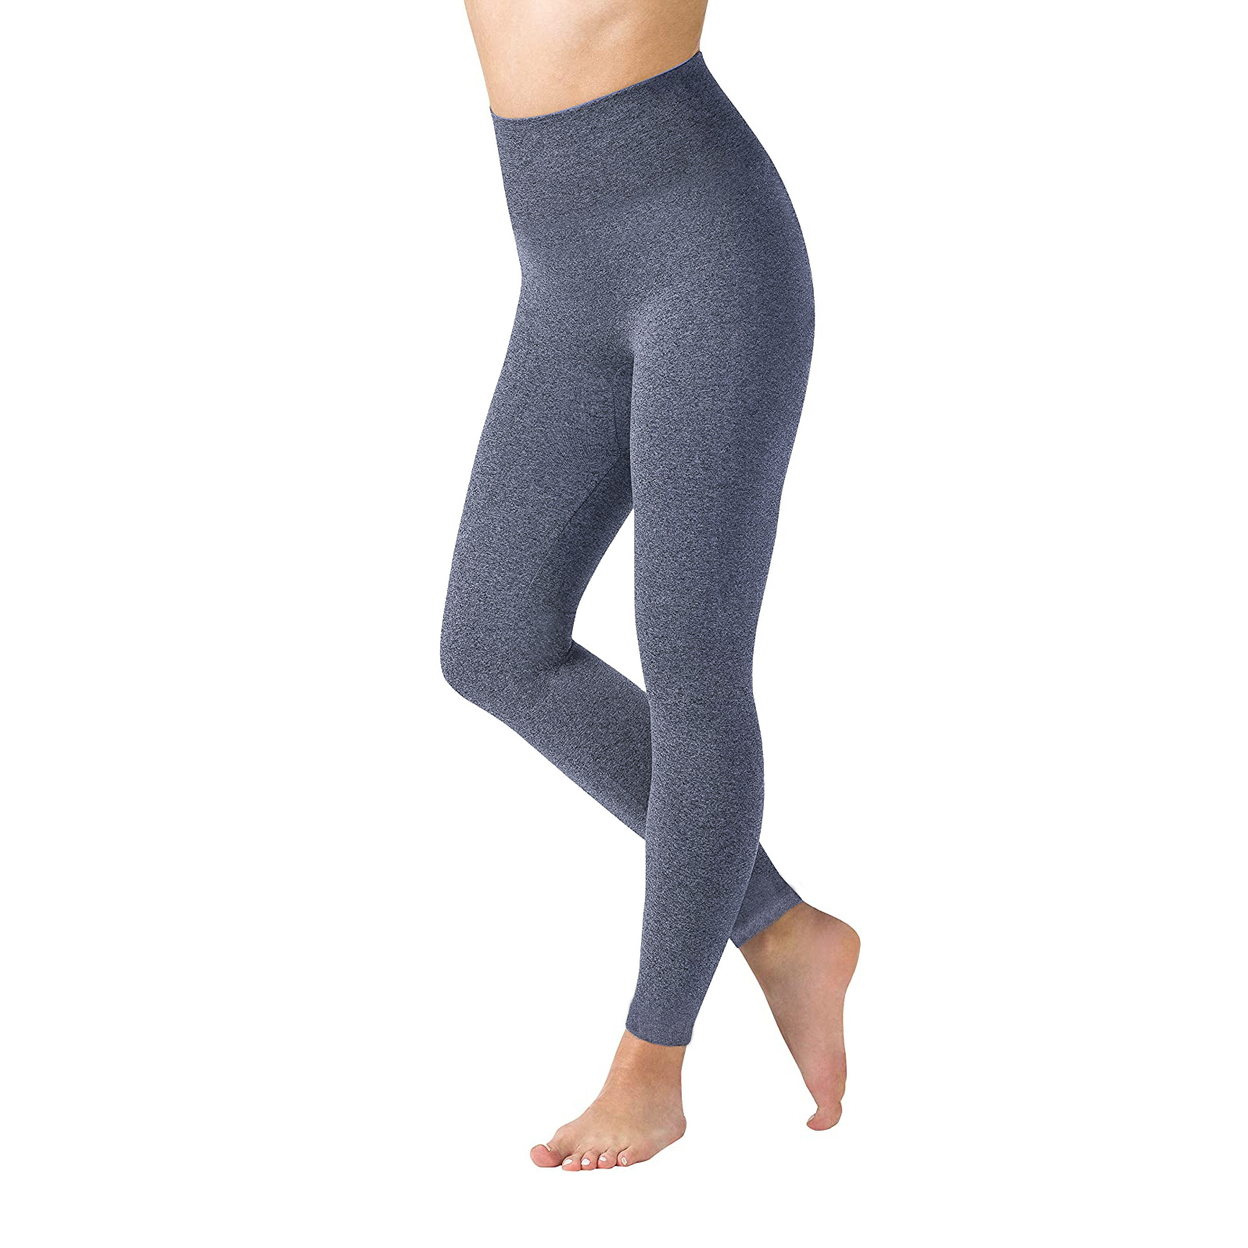 Multi-Pack: Women's High Waisted Ultra-Soft Fleece Lined Warm Marled Leggings(Available In Plus Sizes) - 2-pack, Charcoal & Charcoal, Medium